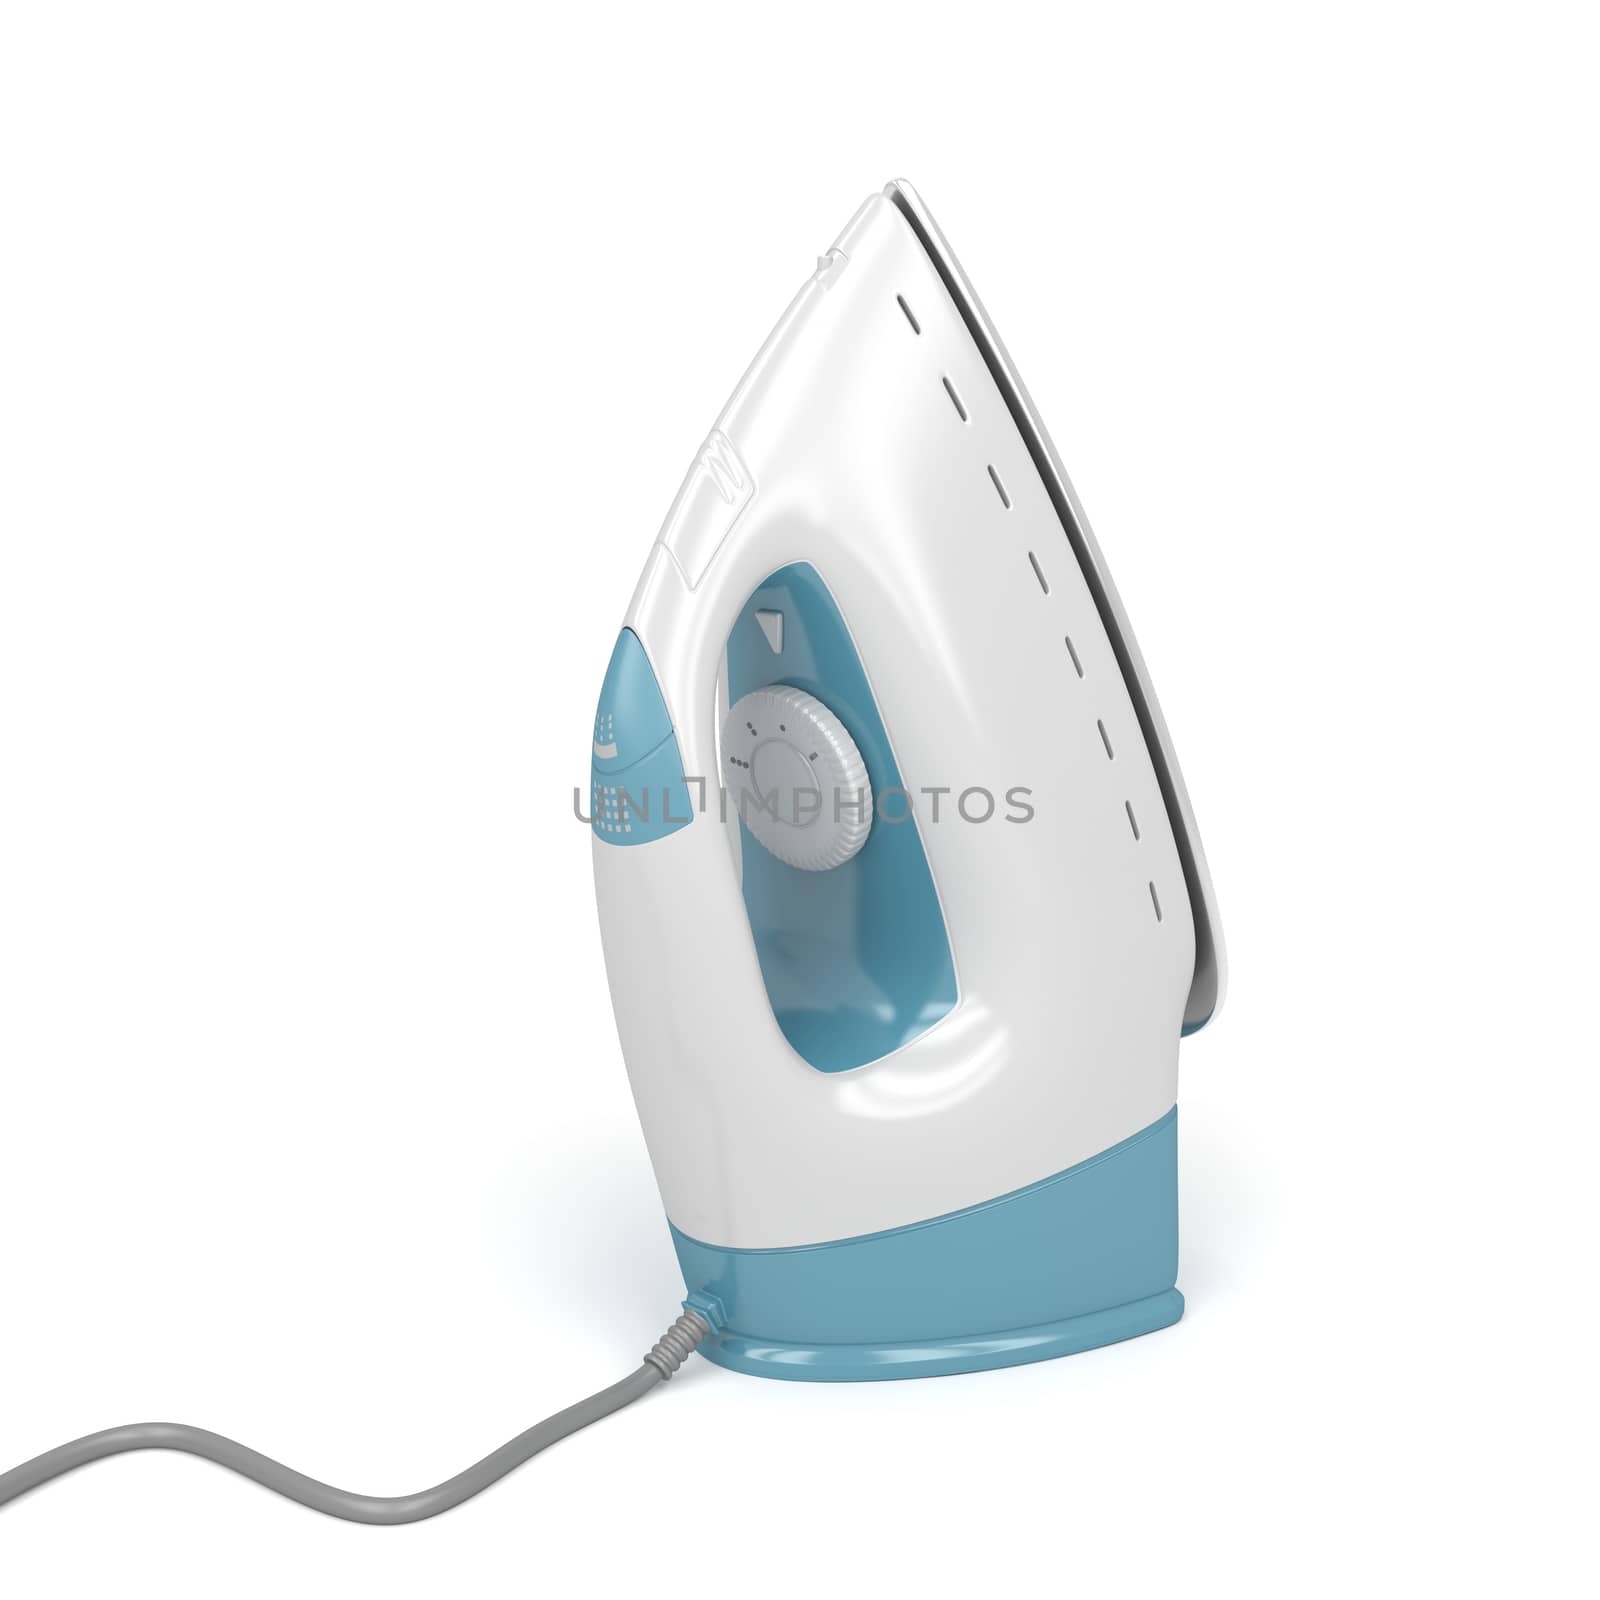 Steam electric iron on white background